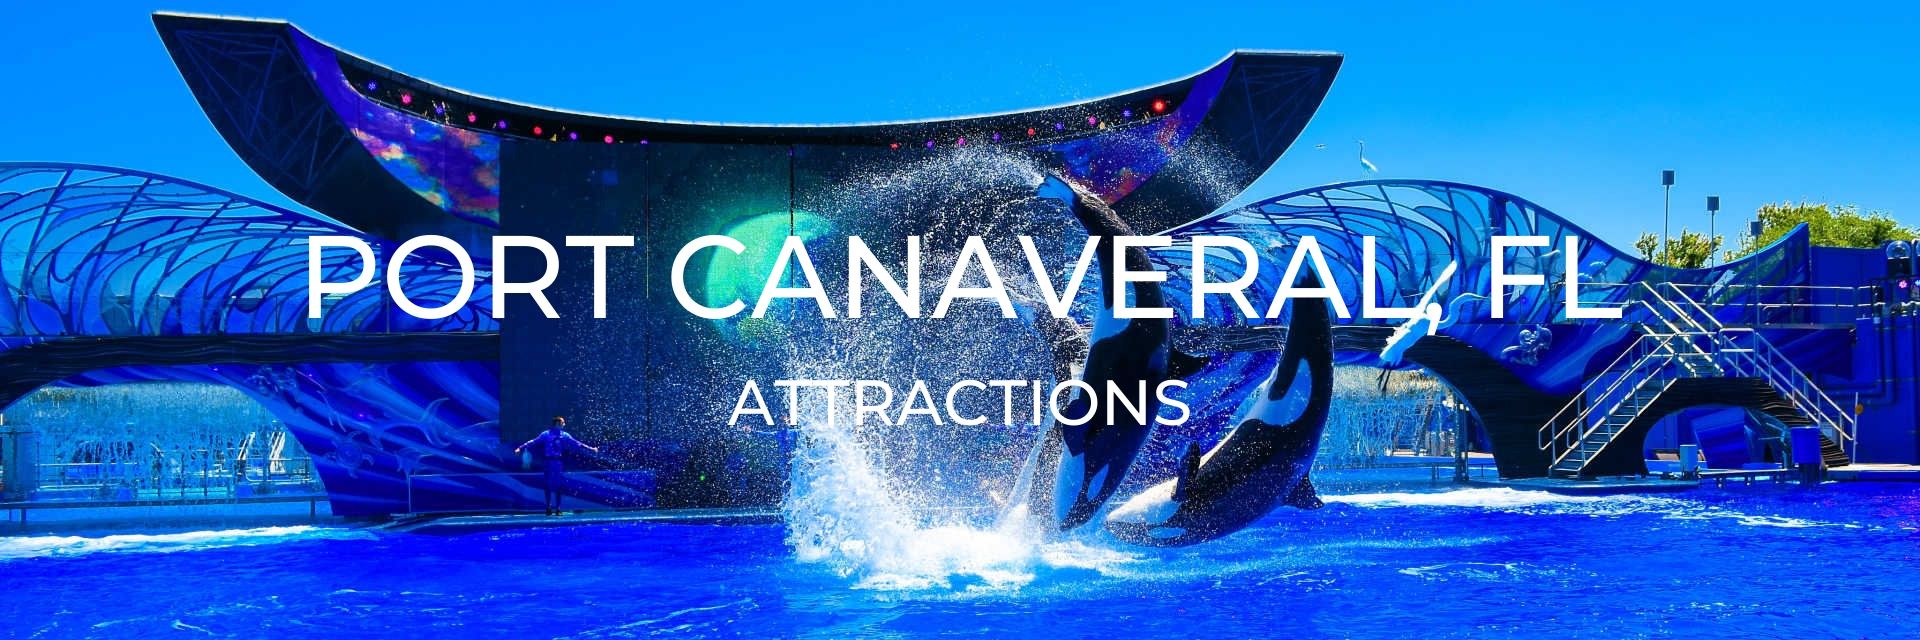 port canaveral tourist attractions